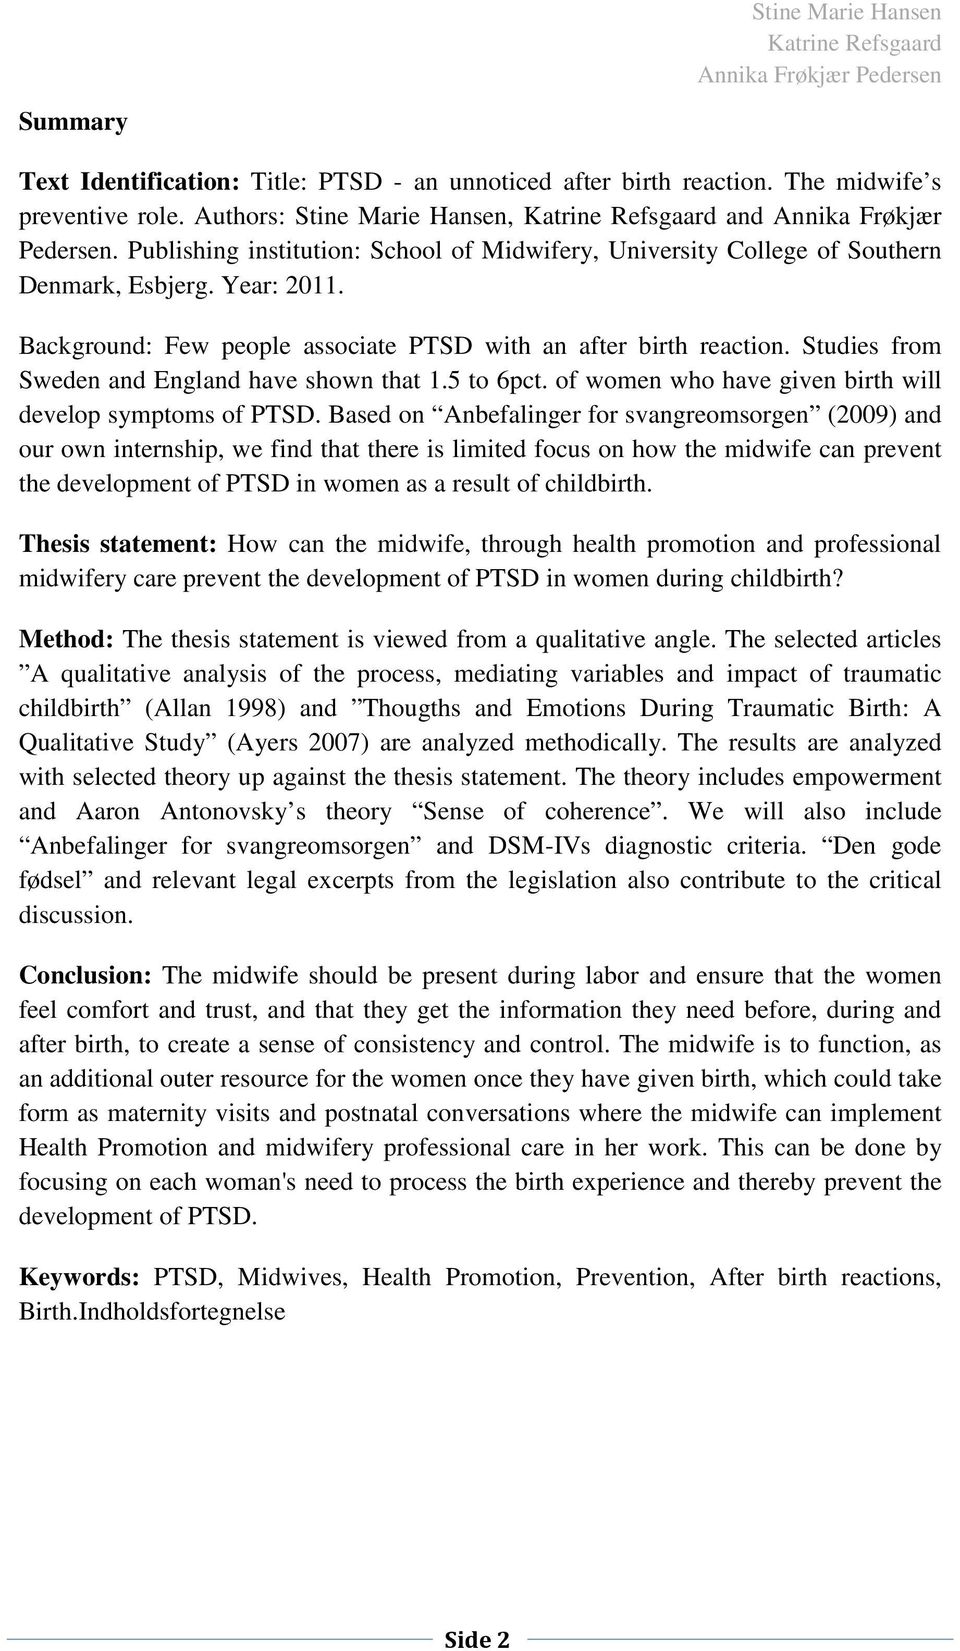 Studies from Sweden and England have shown that 1.5 to 6pct. of women who have given birth will develop symptoms of PTSD.